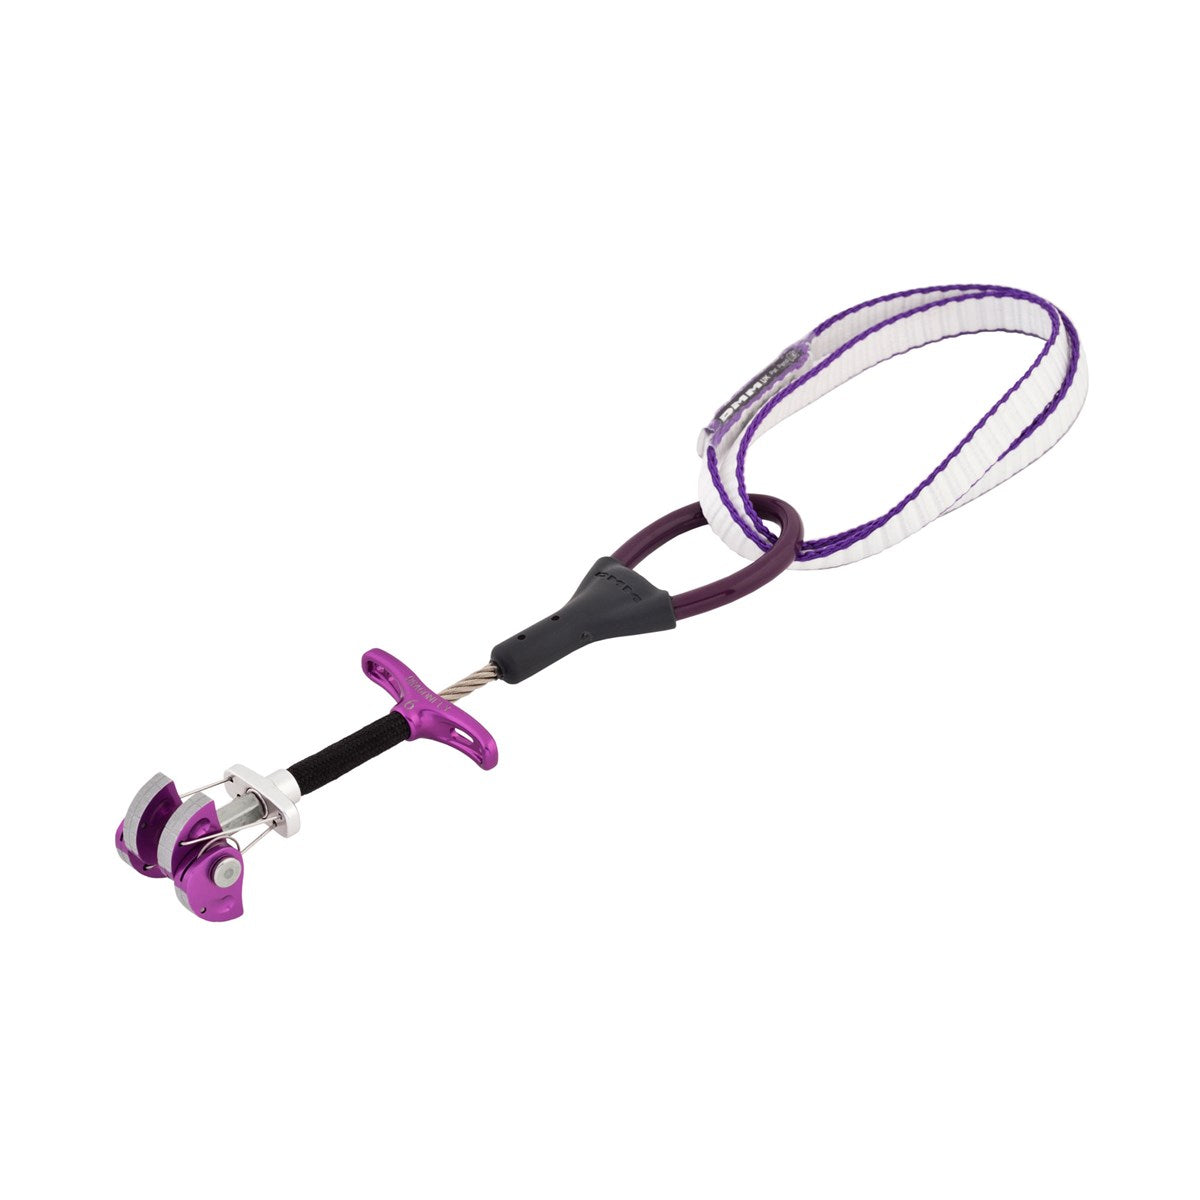 DMM Dragonfly Cam Size 6, in purple colour